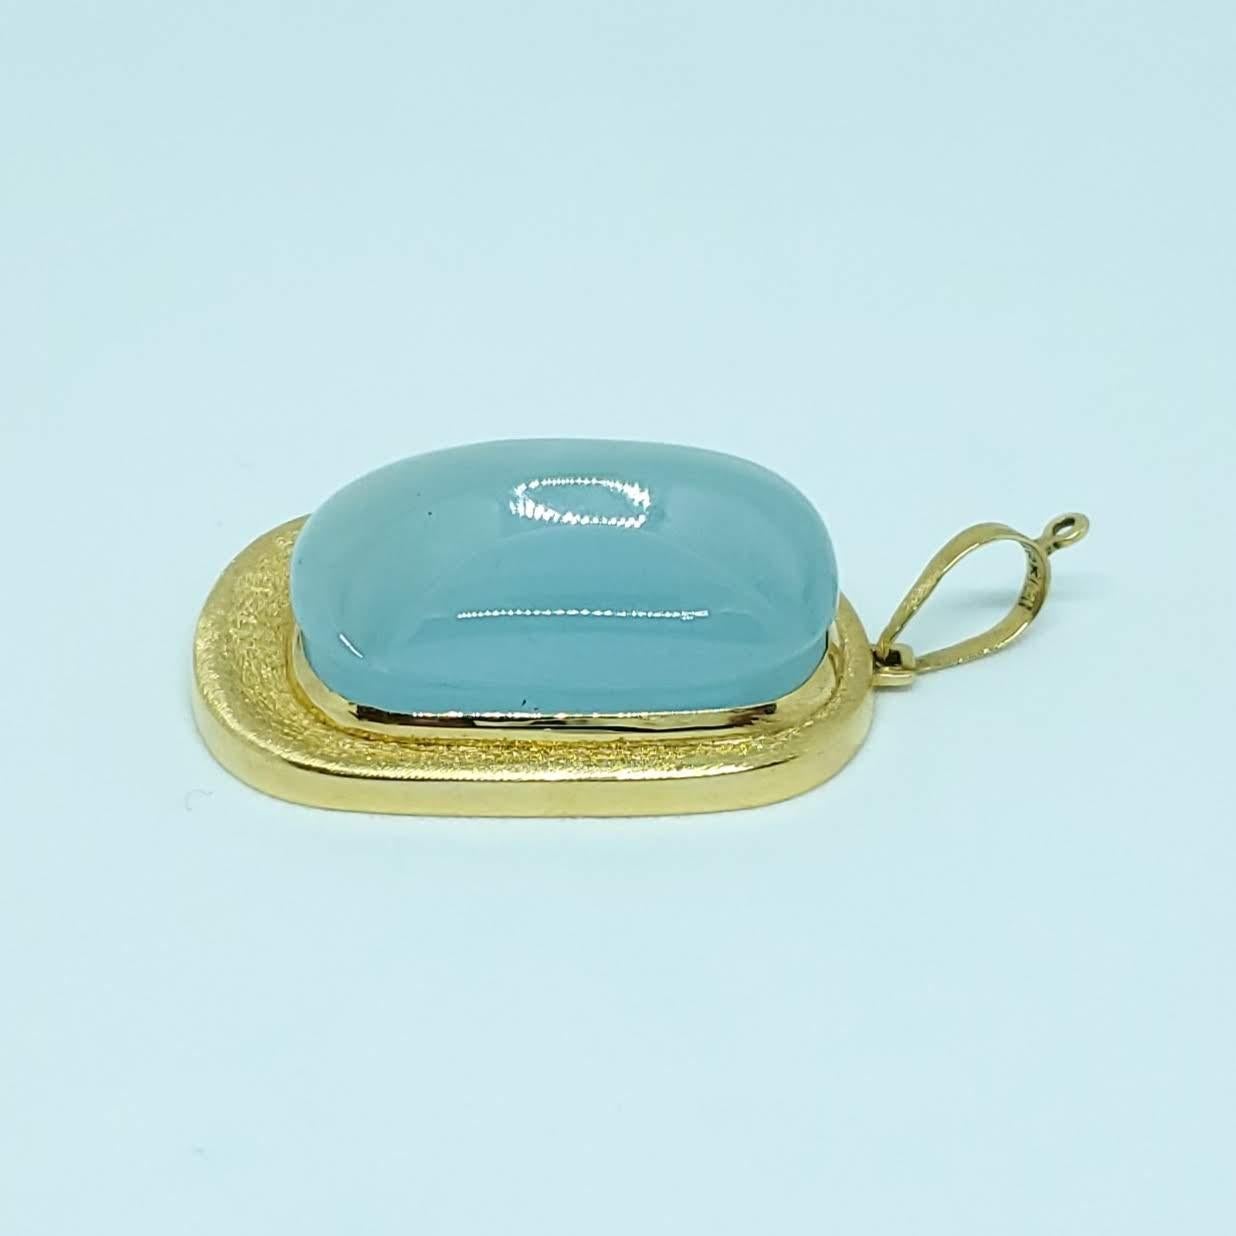 Burle Marx 18 Karat Gold Freeform 'Forma Livre' Aquamarine Pendant In Excellent Condition For Sale In Woodway, TX